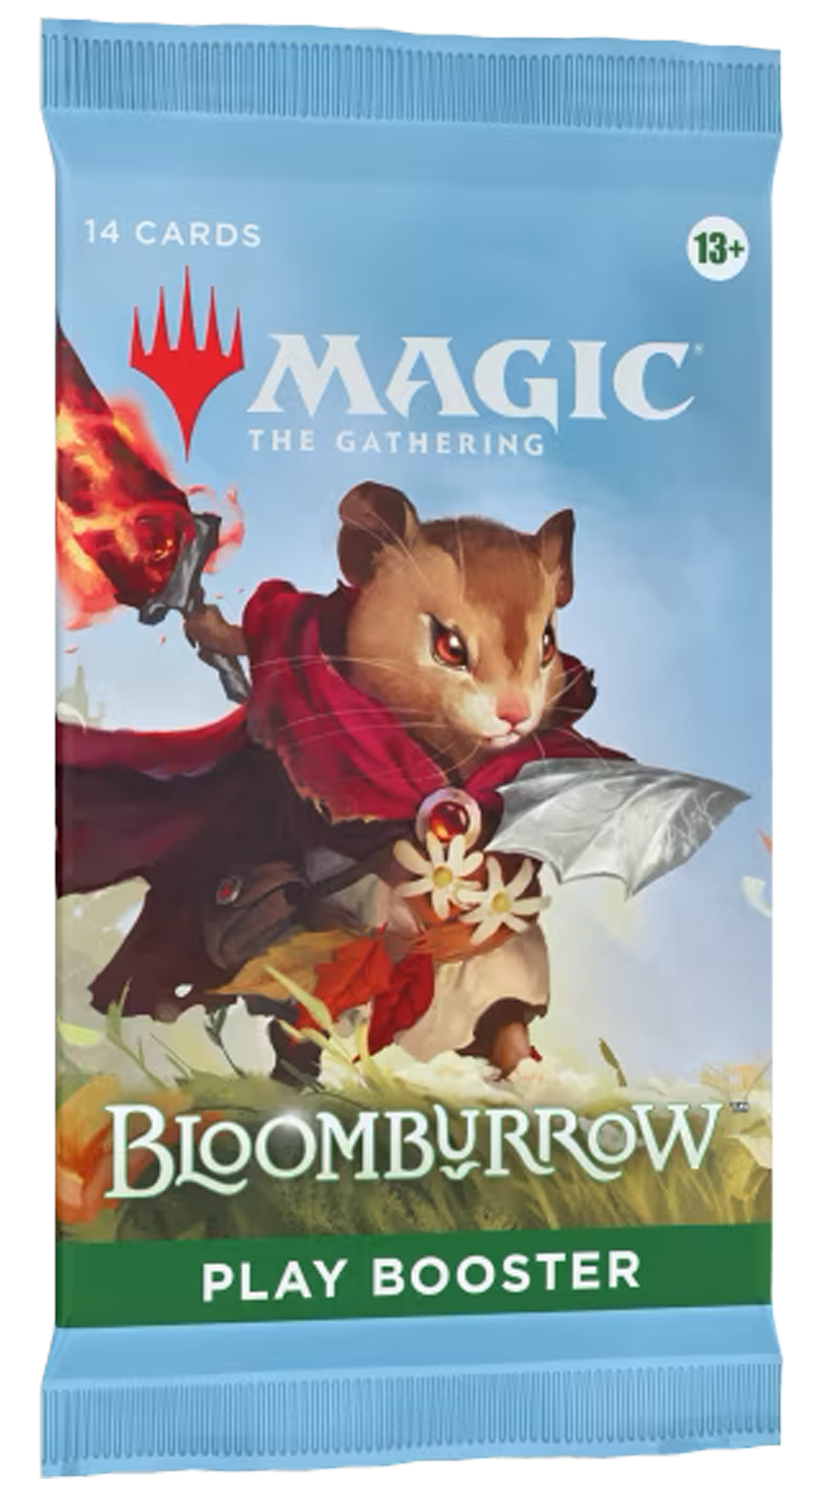 Bloomburrow Play Booster - Magic the Gathering - EN